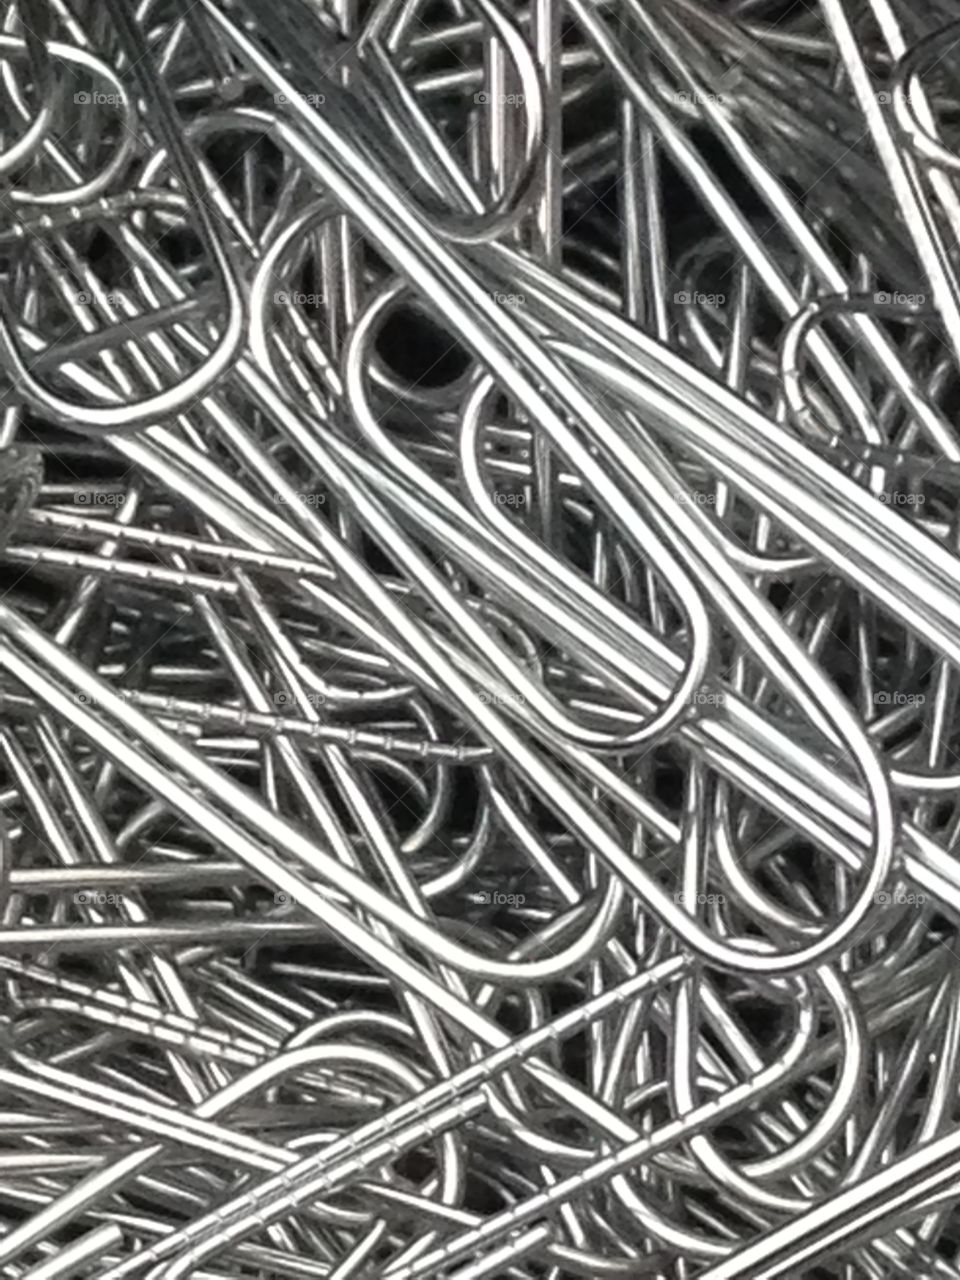 Simply Paper Clips